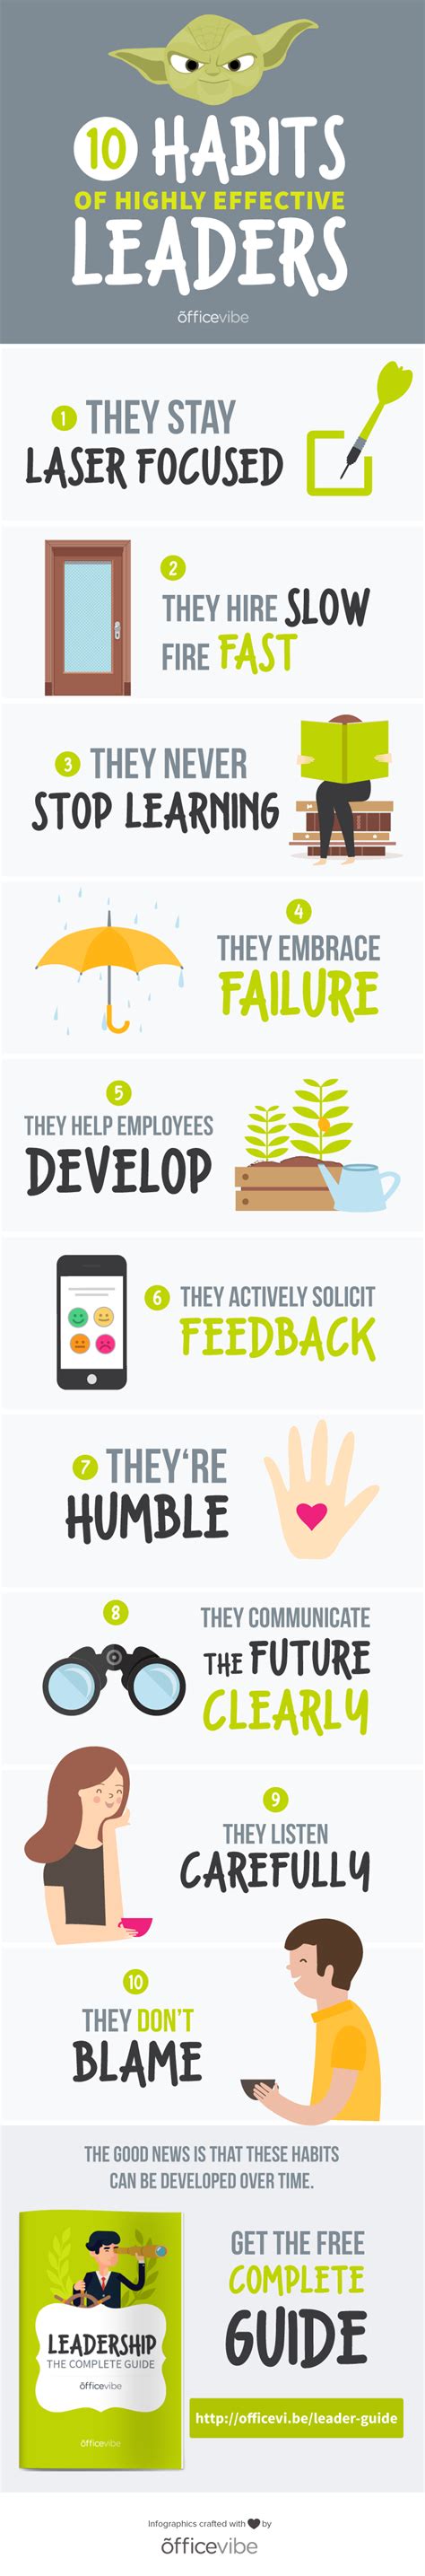 10 habits of highly effective leaders [infographic] business 2 community